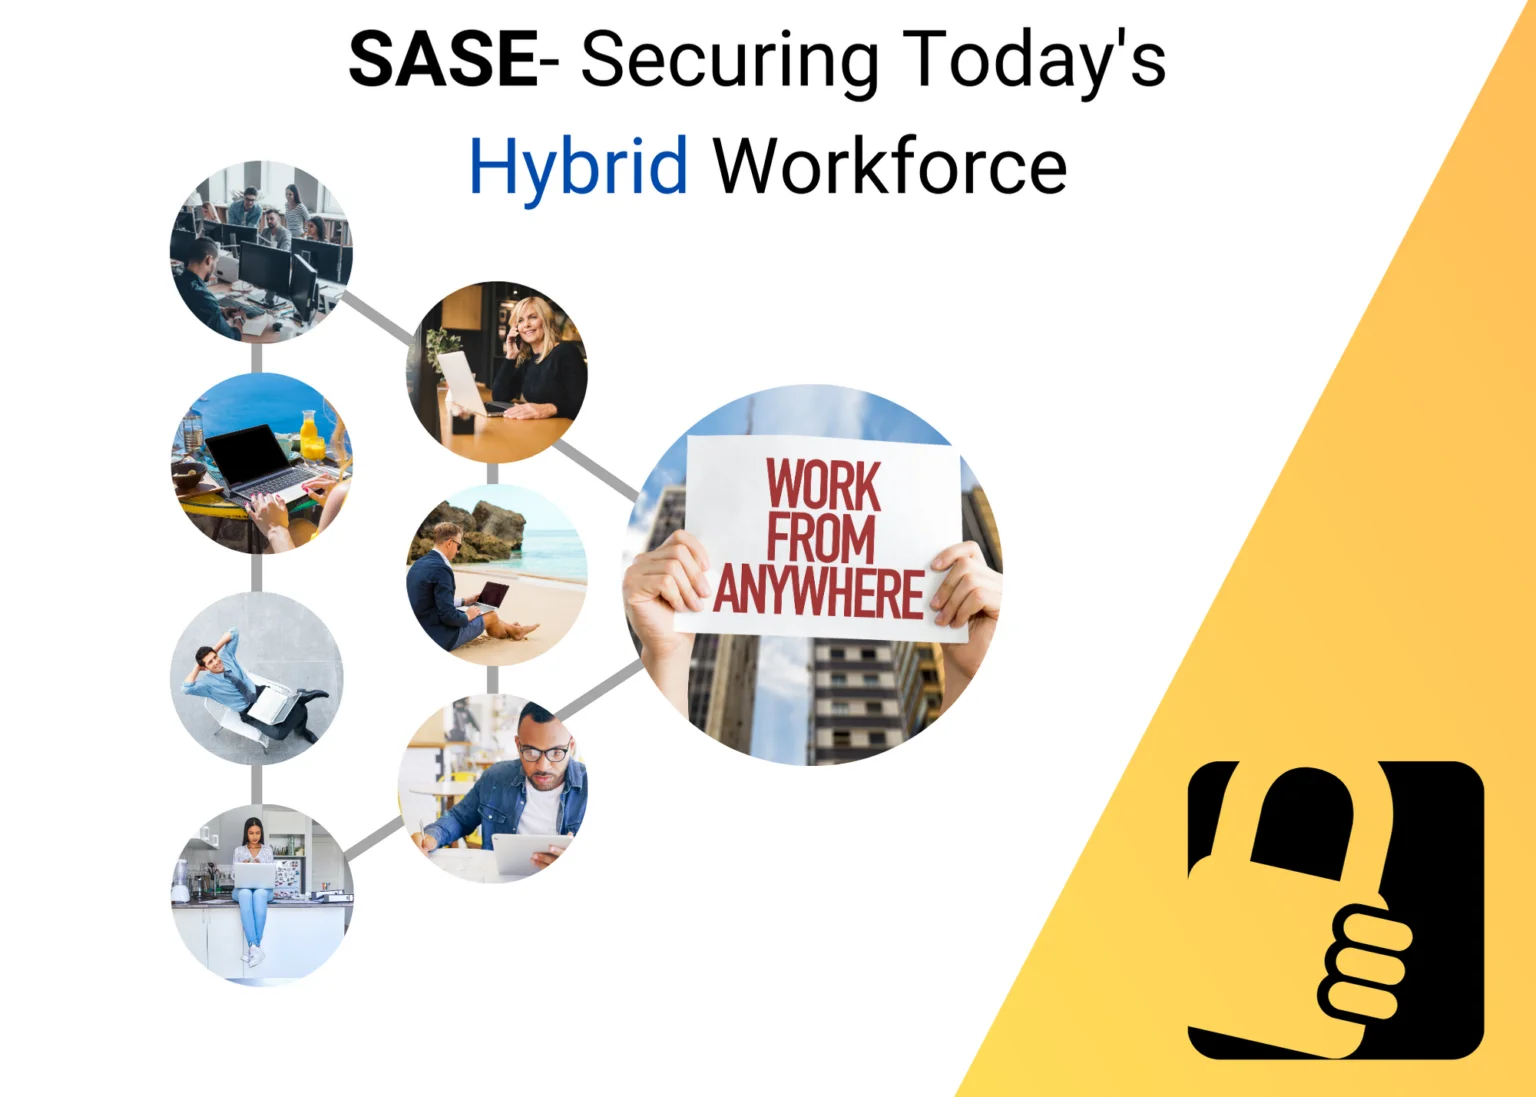 How SASE can secure a hybrid/distributed workforce?